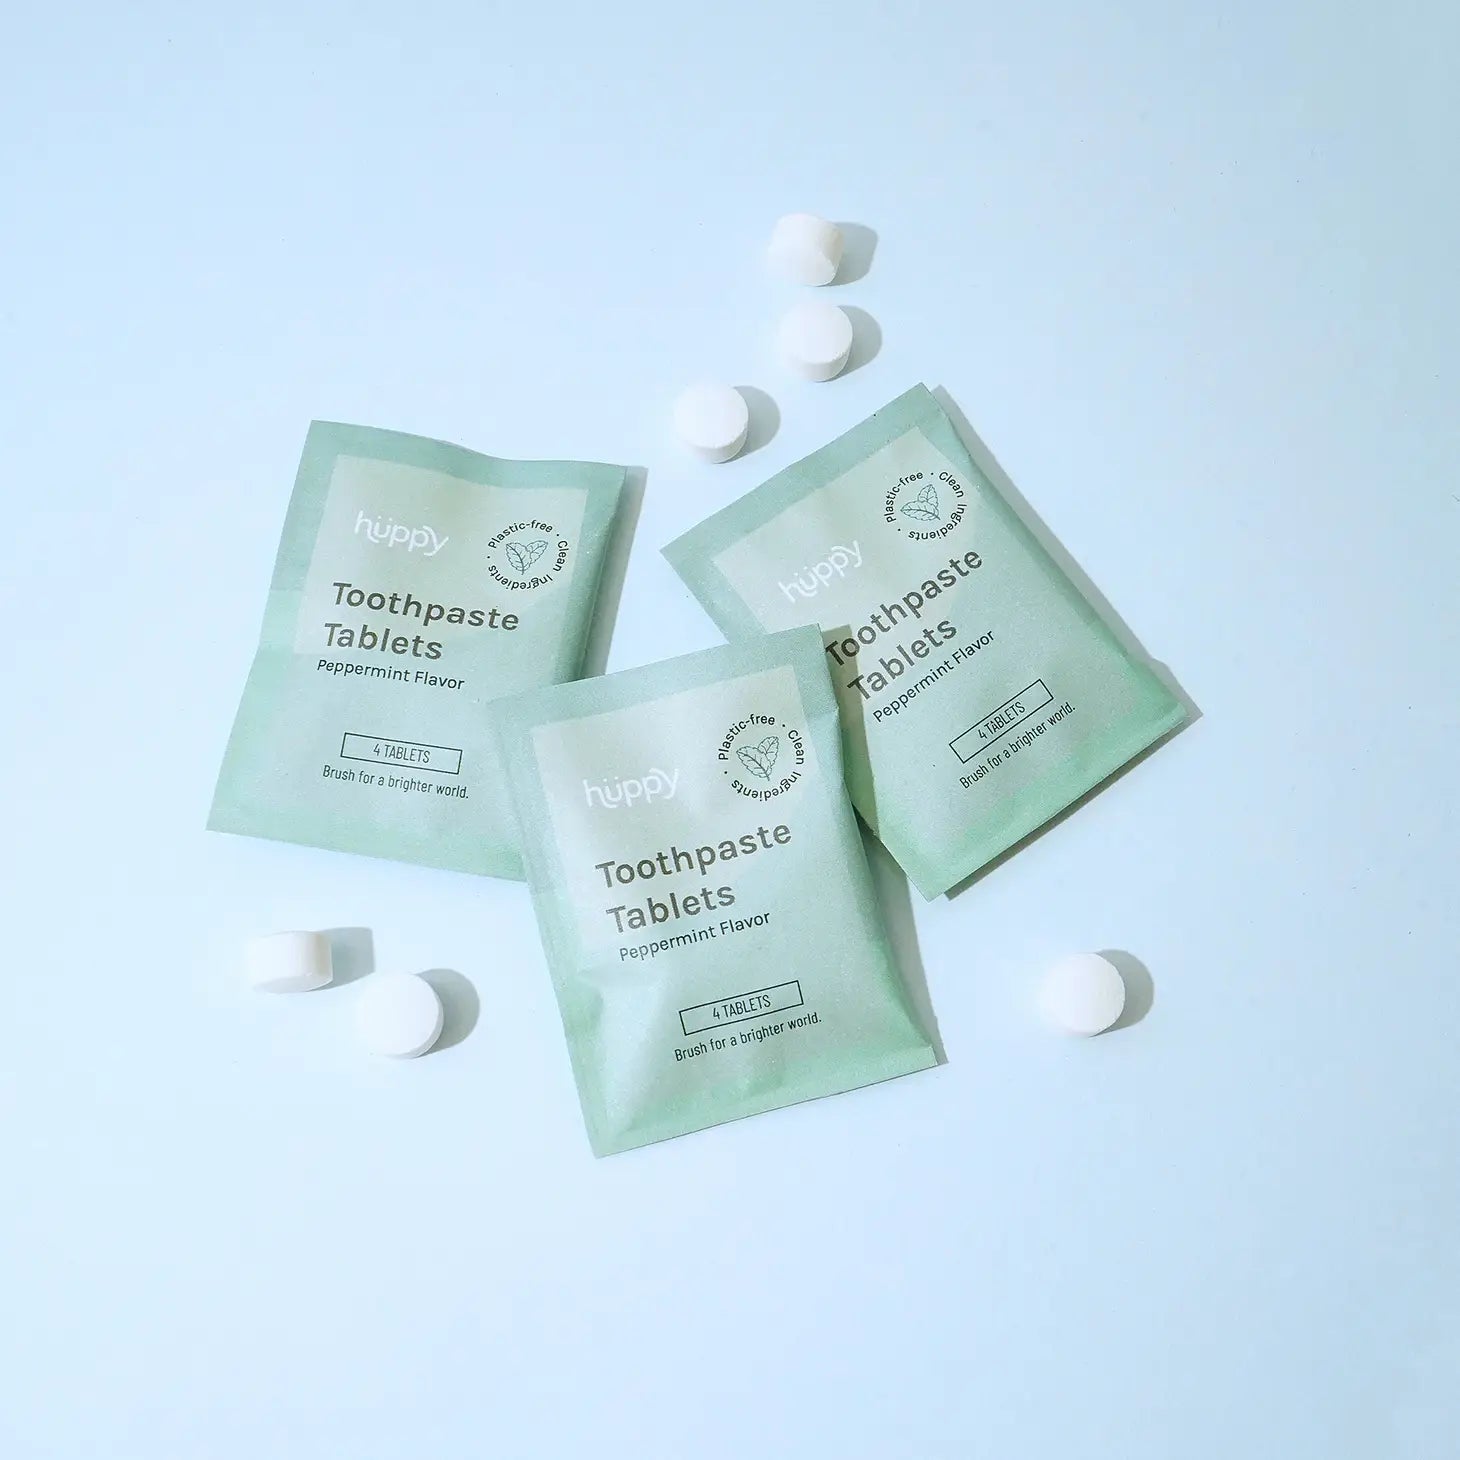 Toothpaste Tablets - Sample